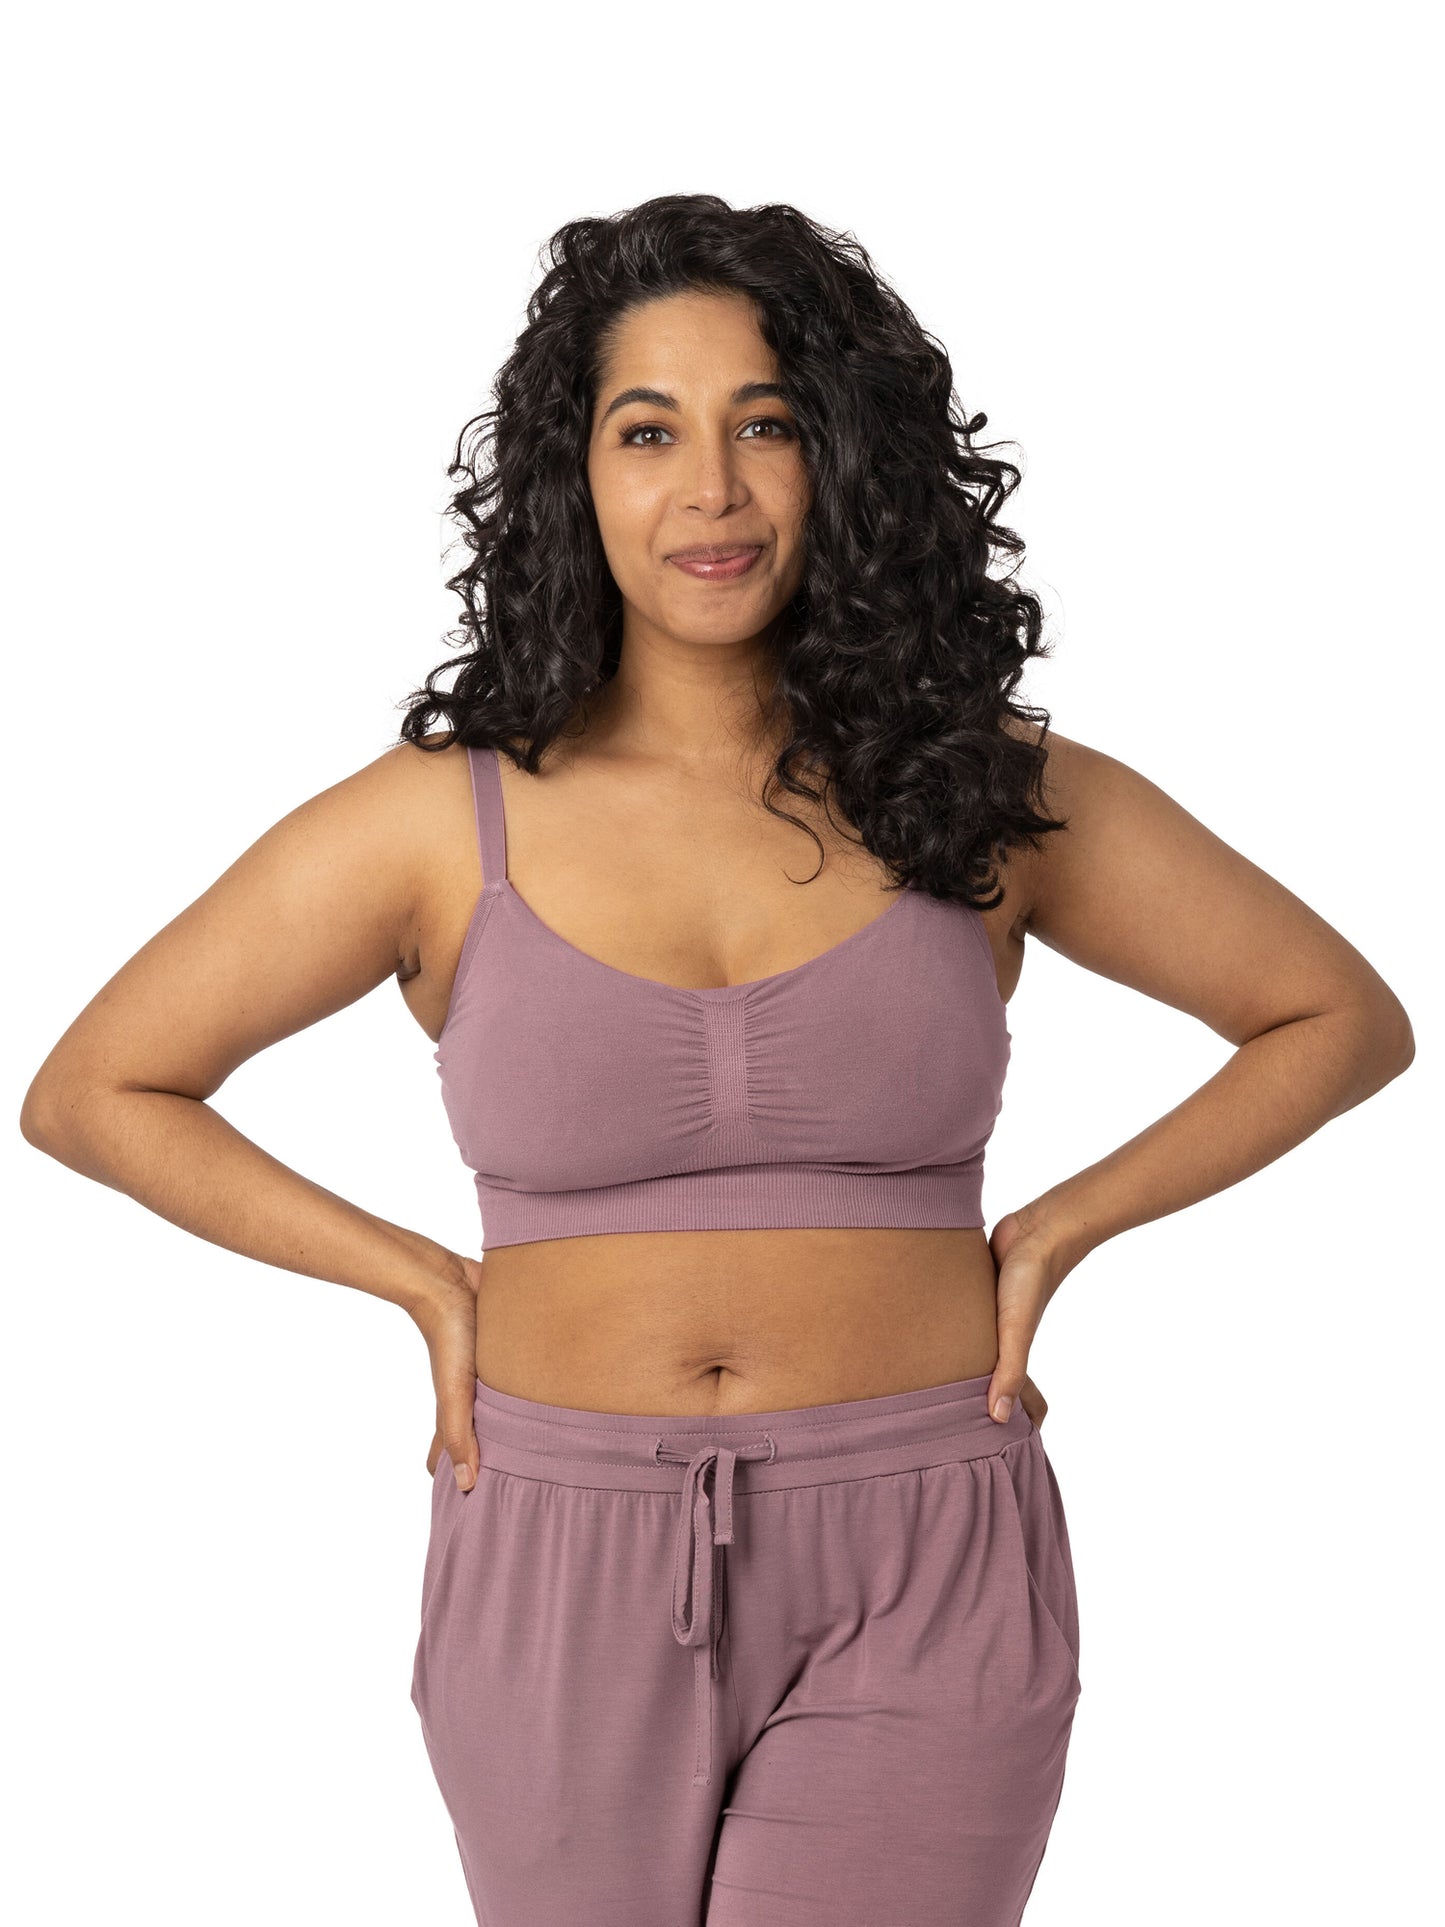 A model wearing the Sublime® Hands-Free Pumping & Nursing Bra in twilight with the matching lounge pants@model_info:Zakeeya is wearing a Small. 